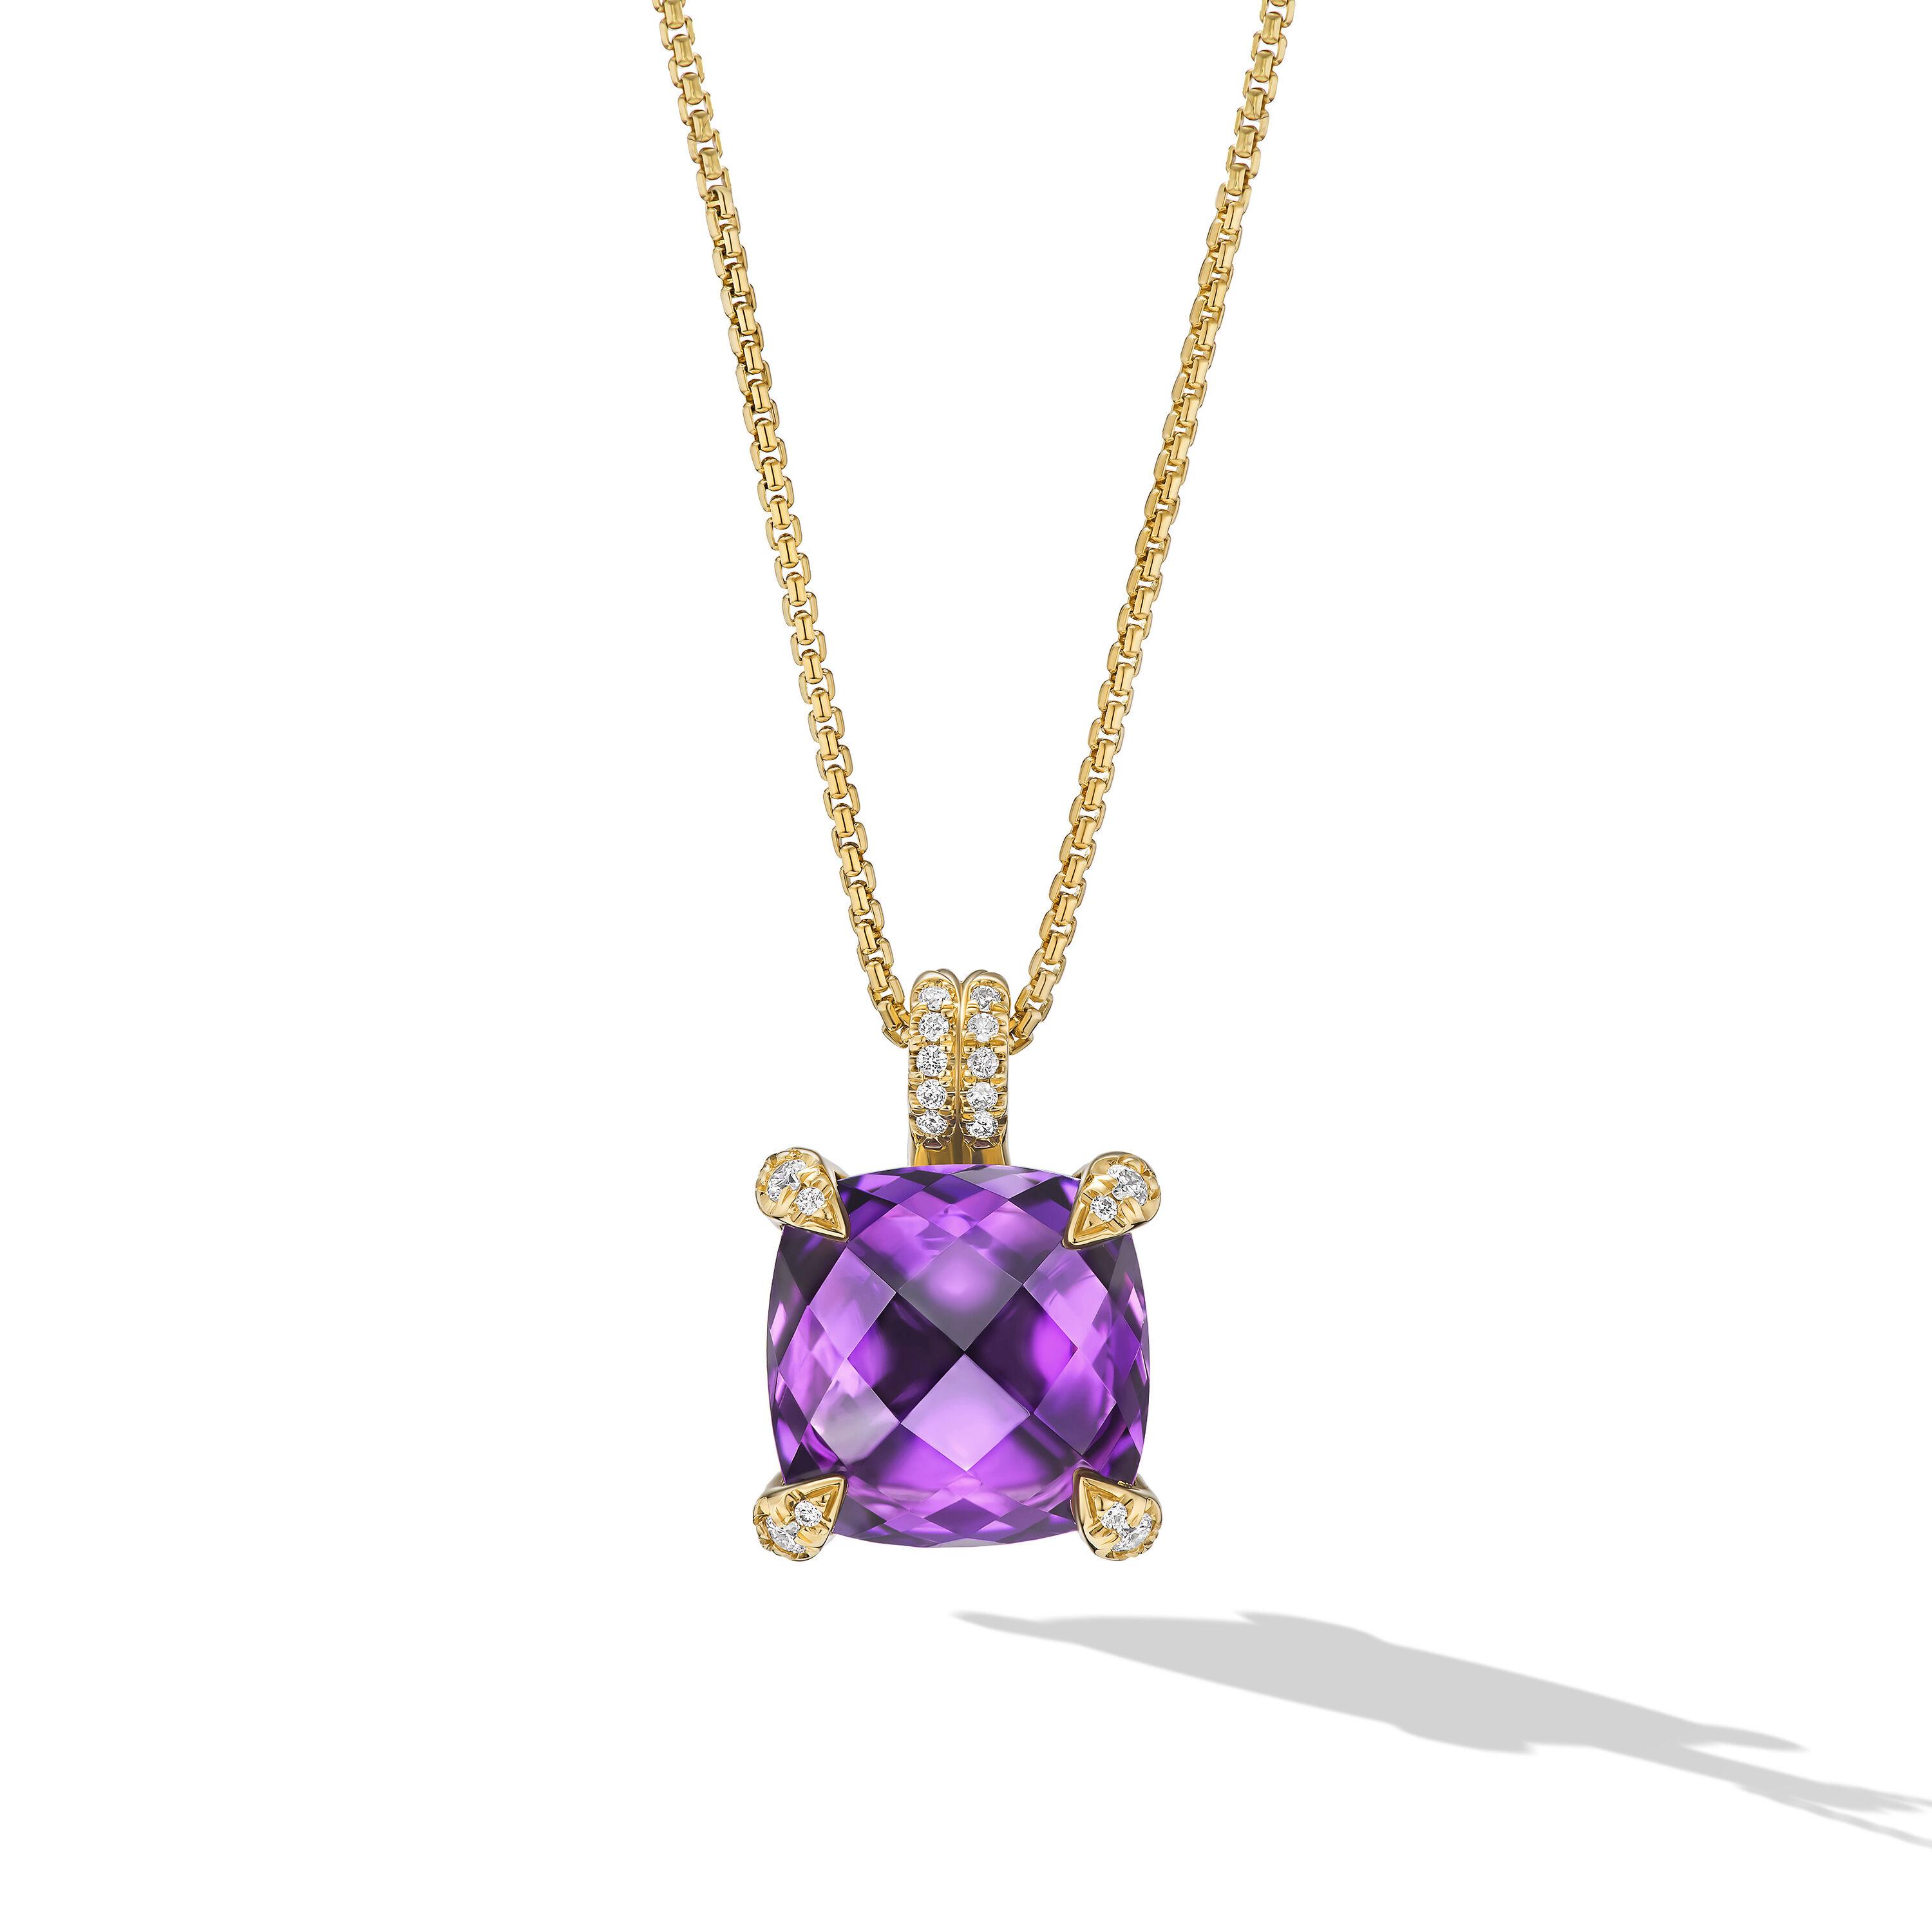 David Yurman Chatelaine Pendant Necklace in 18K Yellow Gold with Amethyst and Diamonds, 11mm 0